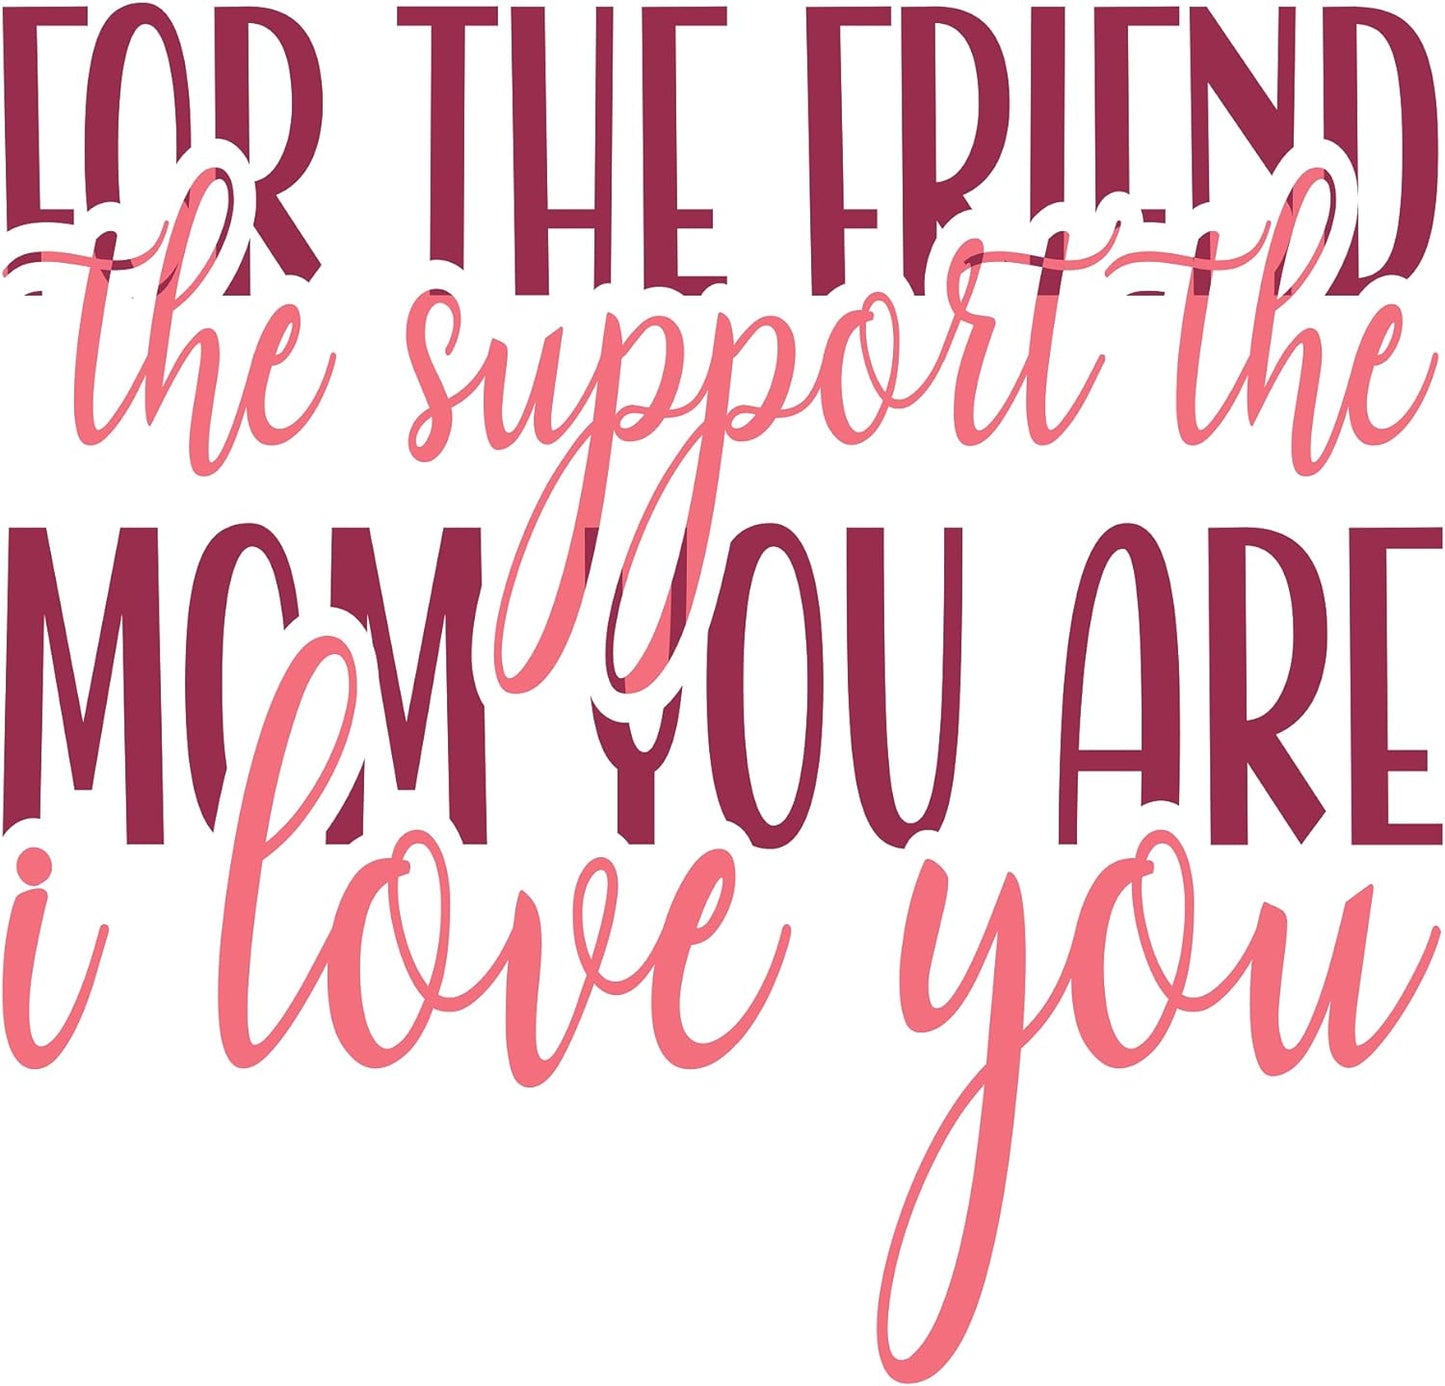 Inspirational Quote "for The Friend The Support The Mom You are I Love You" Motivational Sticker Vinyl Decal Motivation Stickers- 5" Vinyl Sticker Waterproof